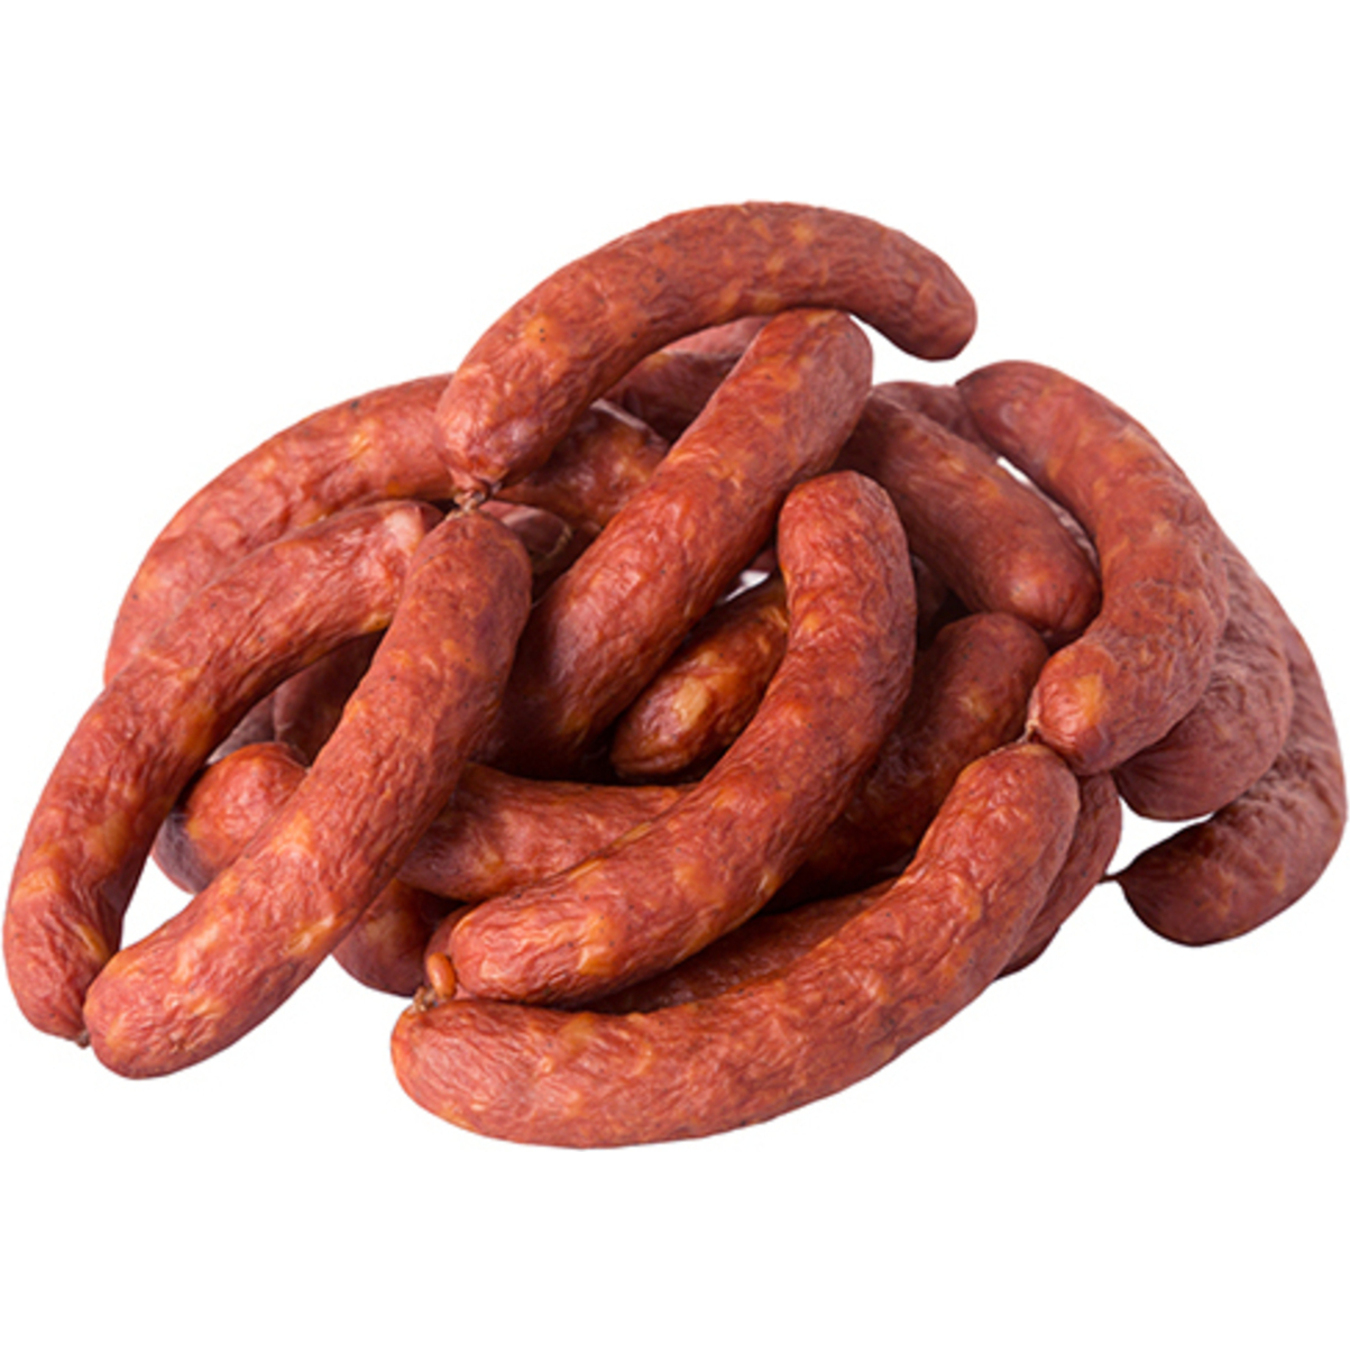 Sausages Alan Hunting boiled and smoked 400-550 grams per package 2